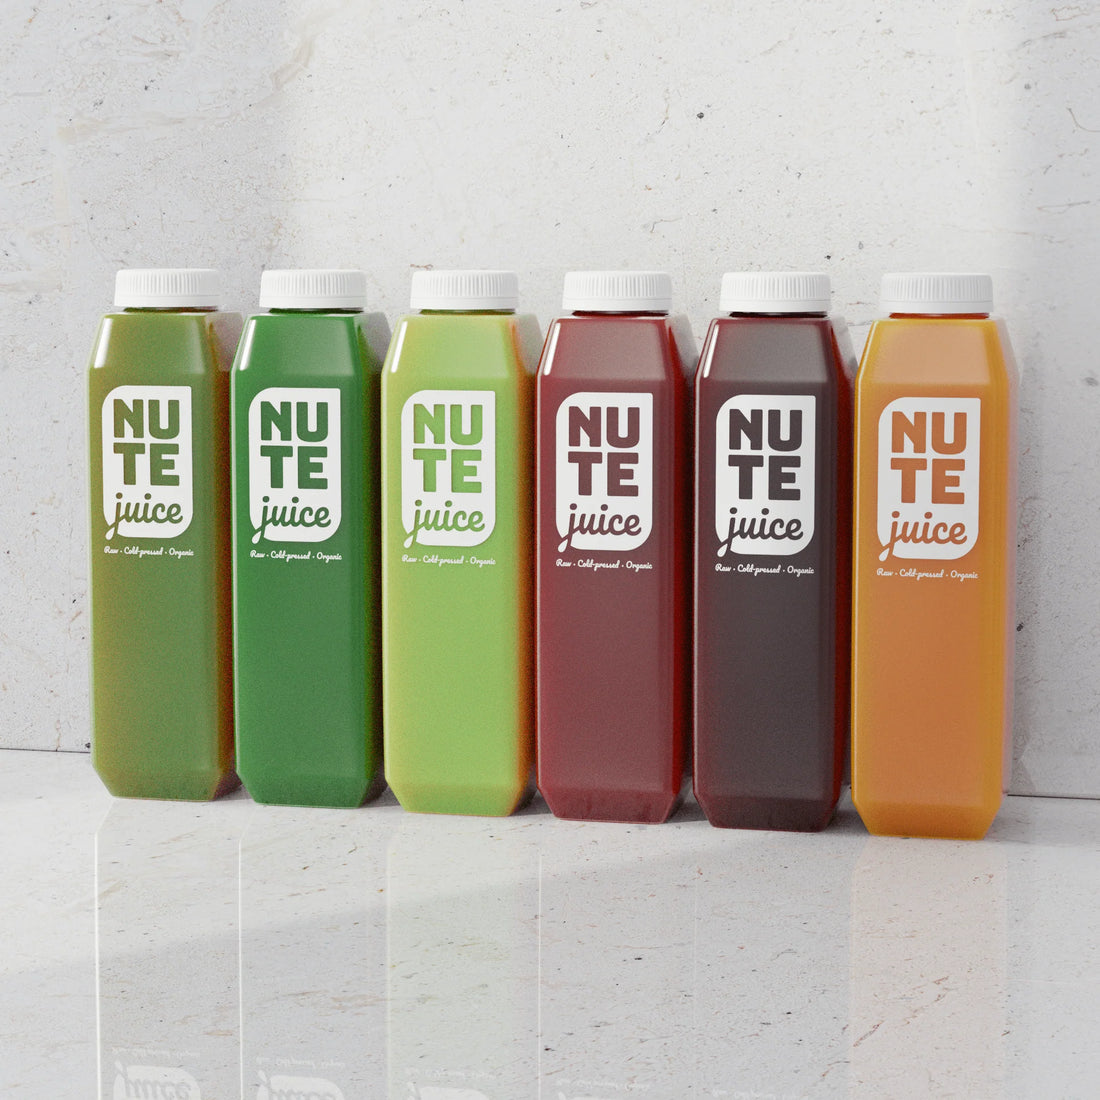 Cold-Pressed Juice Cleanses: Fact or Fiction?